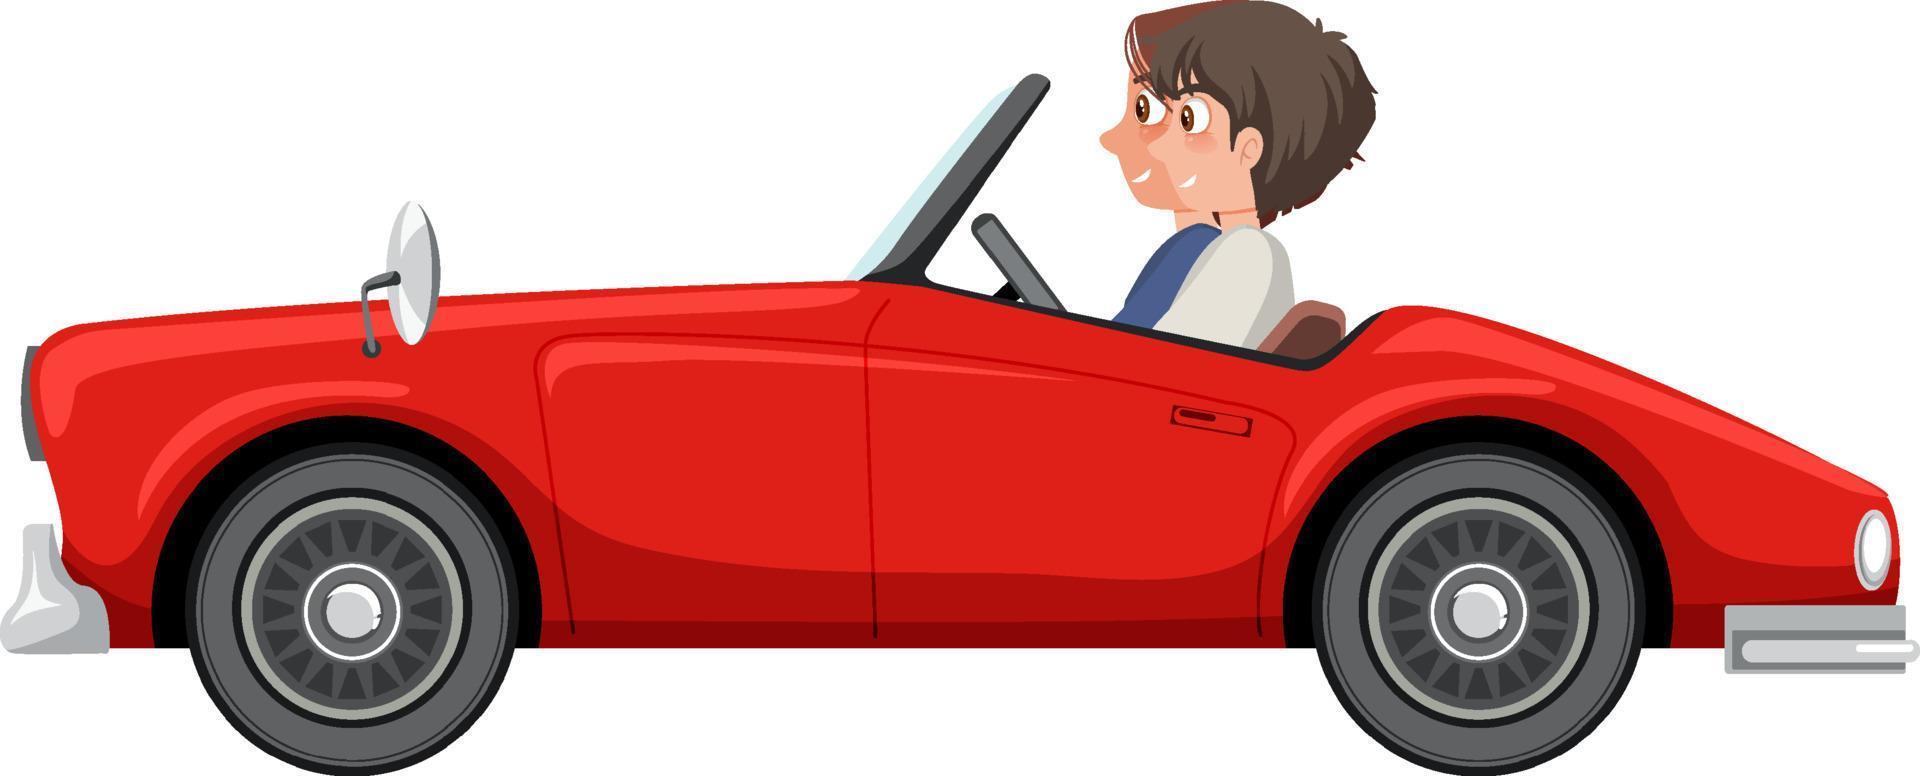 Couple in classic car on white background vector